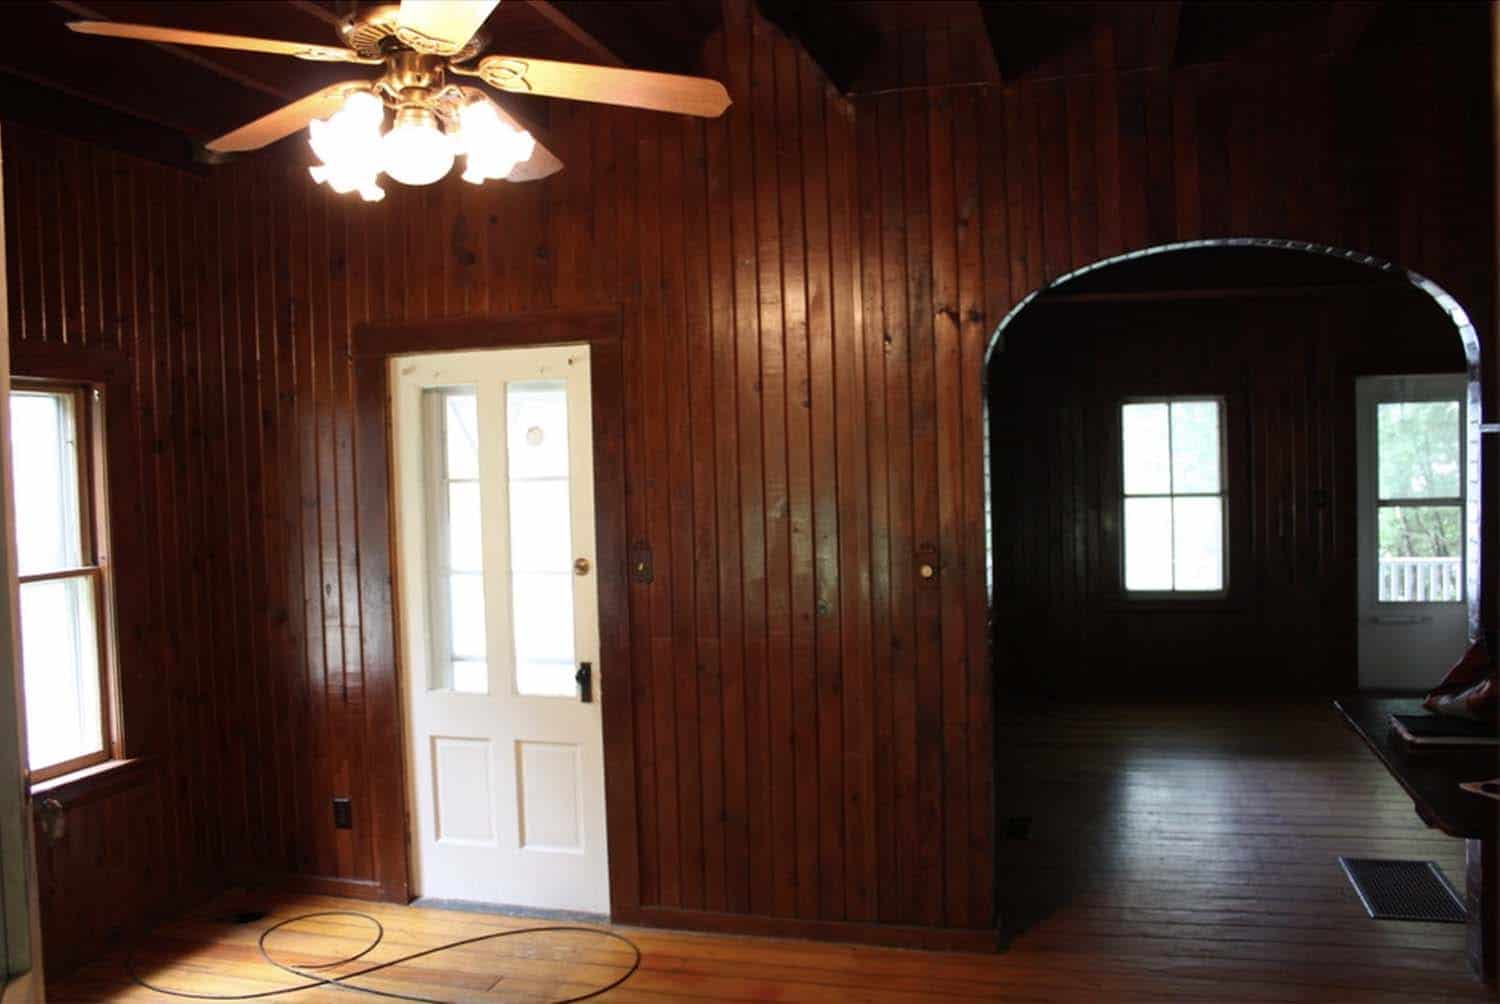 historic cottage entry room before the renovation